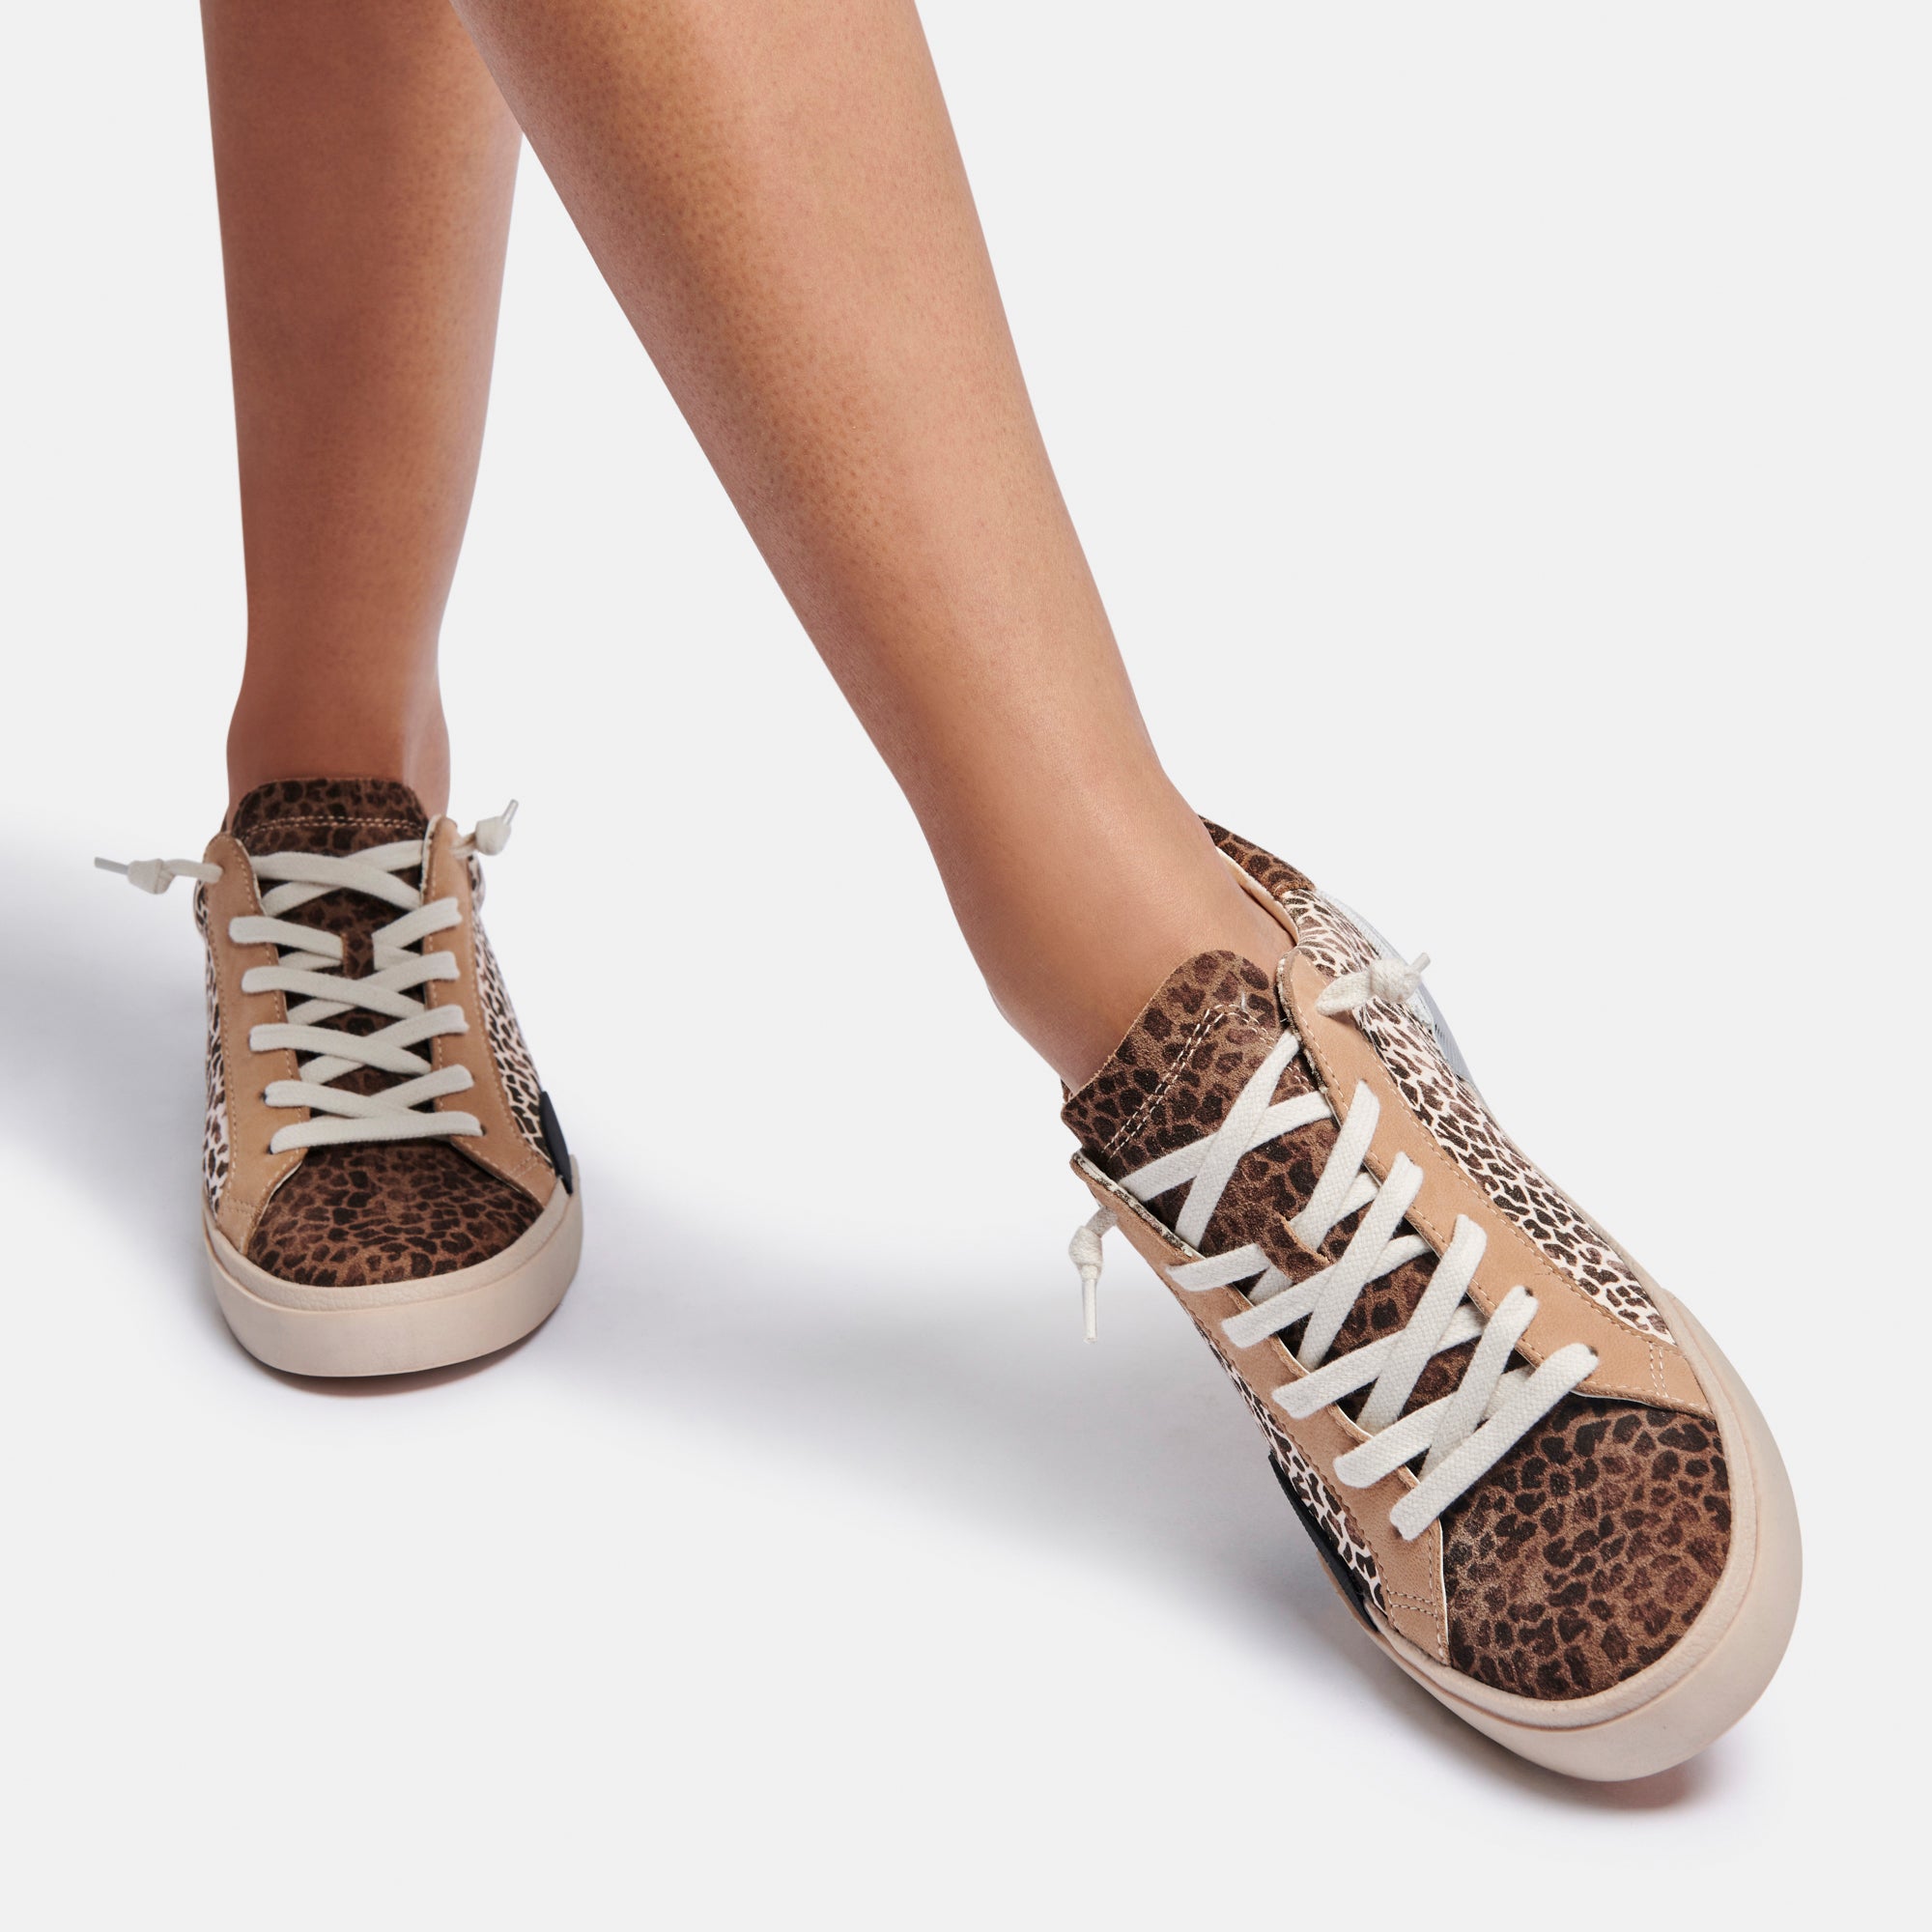 ZINA SNEAKERS LEOPARD MULTI DUSTED SUEDE – Dolce Vita